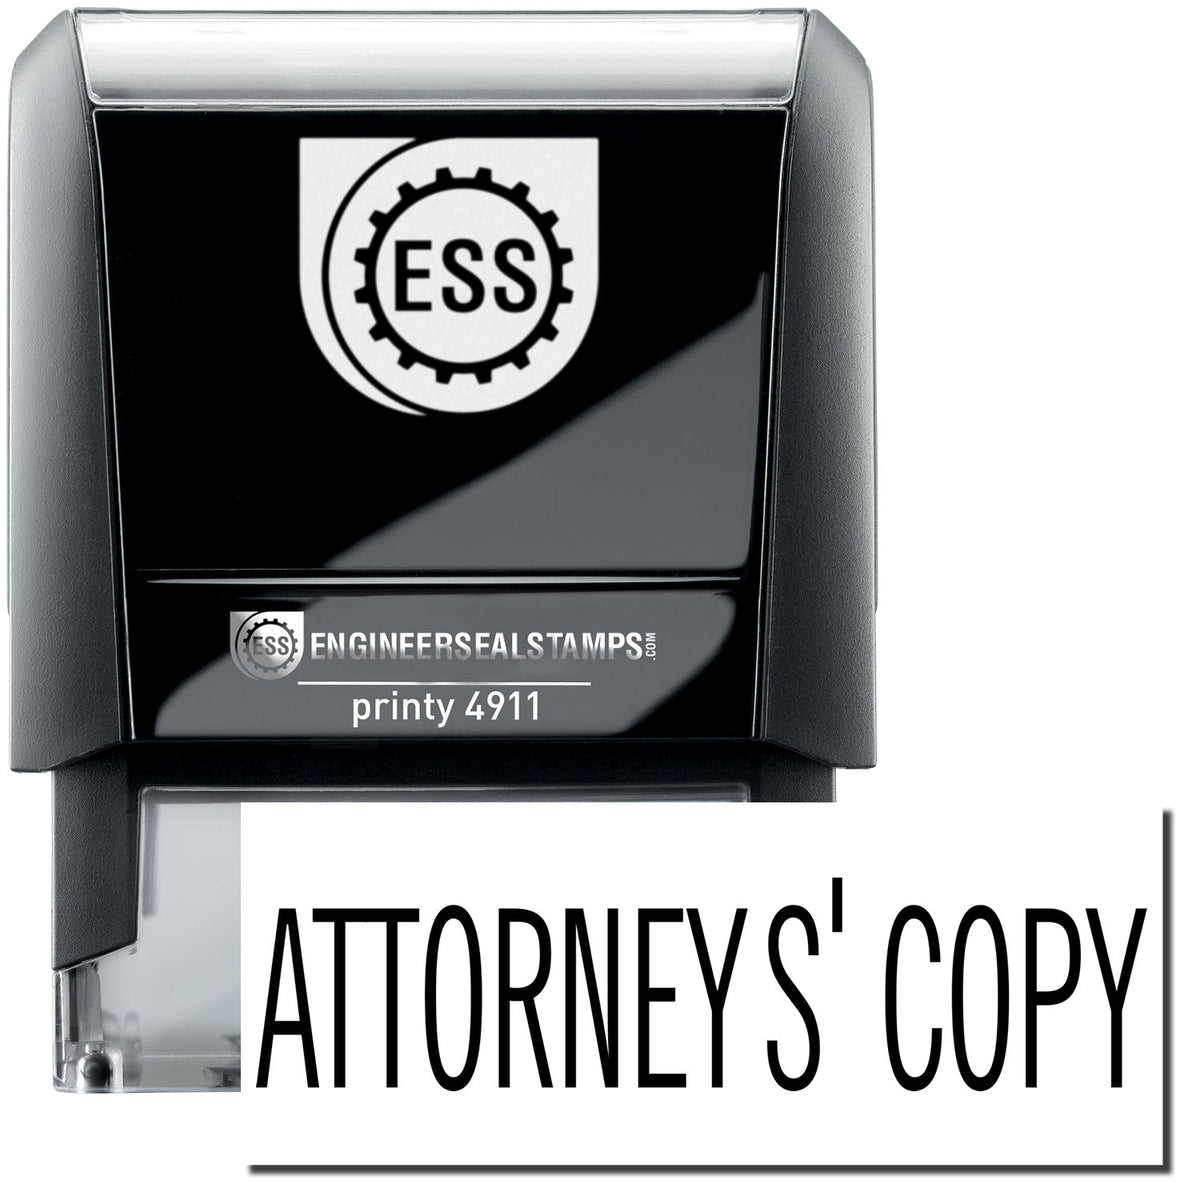 A self-inking stamp with a stamped image showing how the text &quot;ATTORNEYS&#39; COPY&quot; is displayed after stamping.